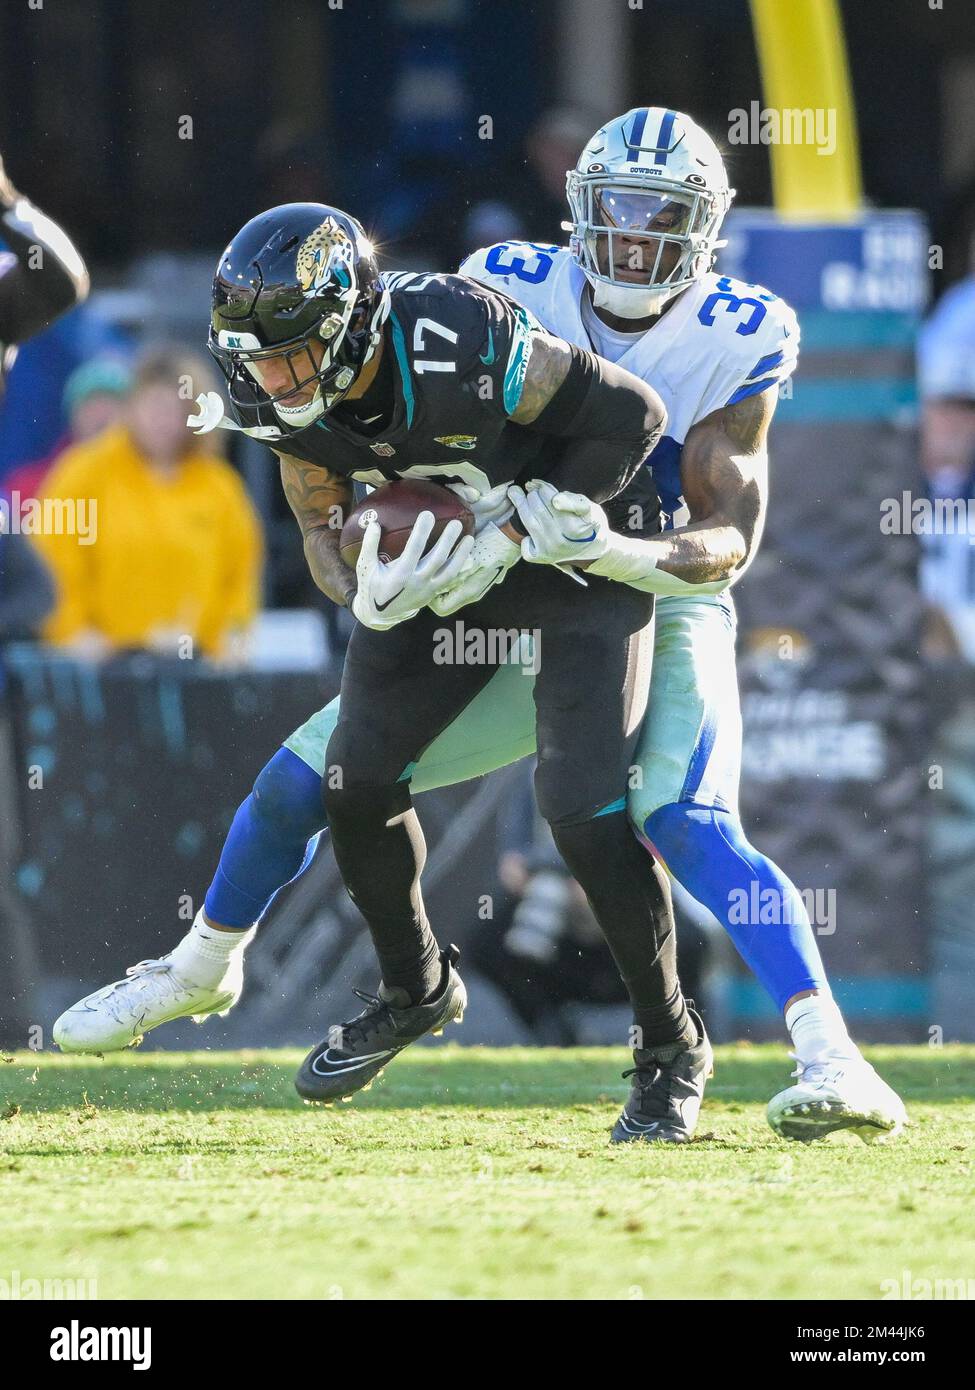 Jacksonville, FL, USA. 18th Dec, 2022. Jacksonville Jaguars tight end Evan Engram (17) is tackled by Dallas Cowboys linebacker Damone Clark (33) after a catch during a game in Jacksonville, FL. Romeo T Guzman/CSM/Alamy Live News Stock Photo